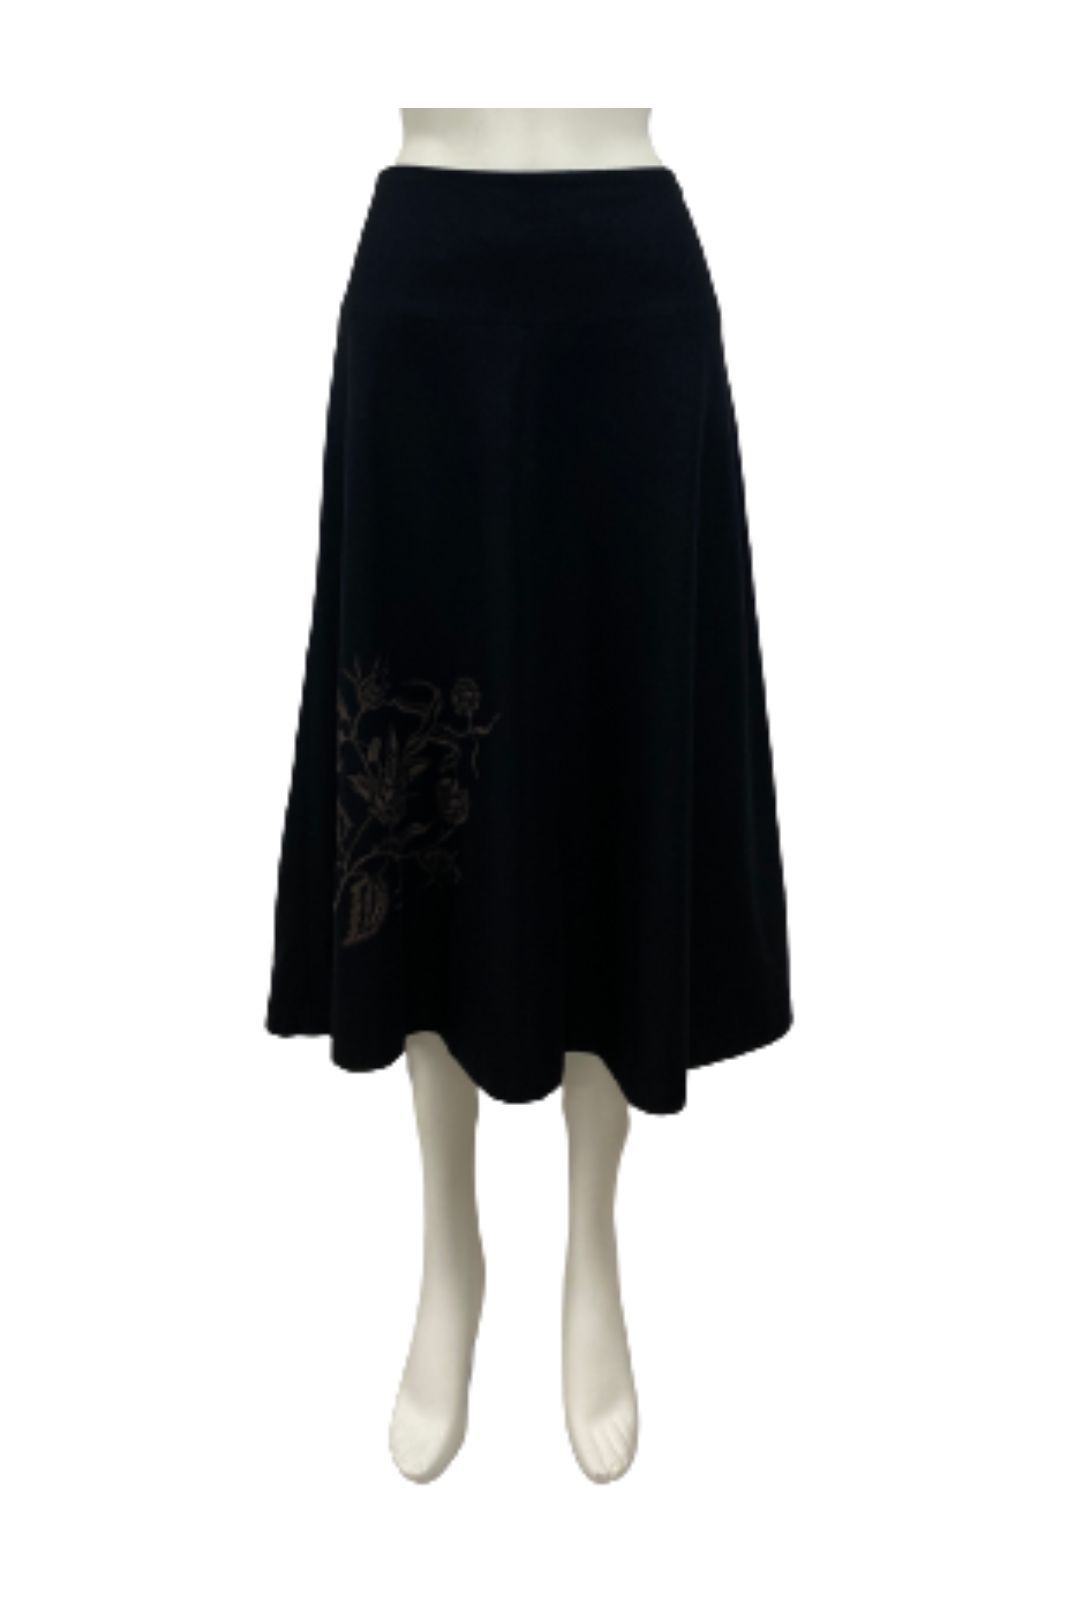 David Lawrence - Winter A line Embroidered Skirt